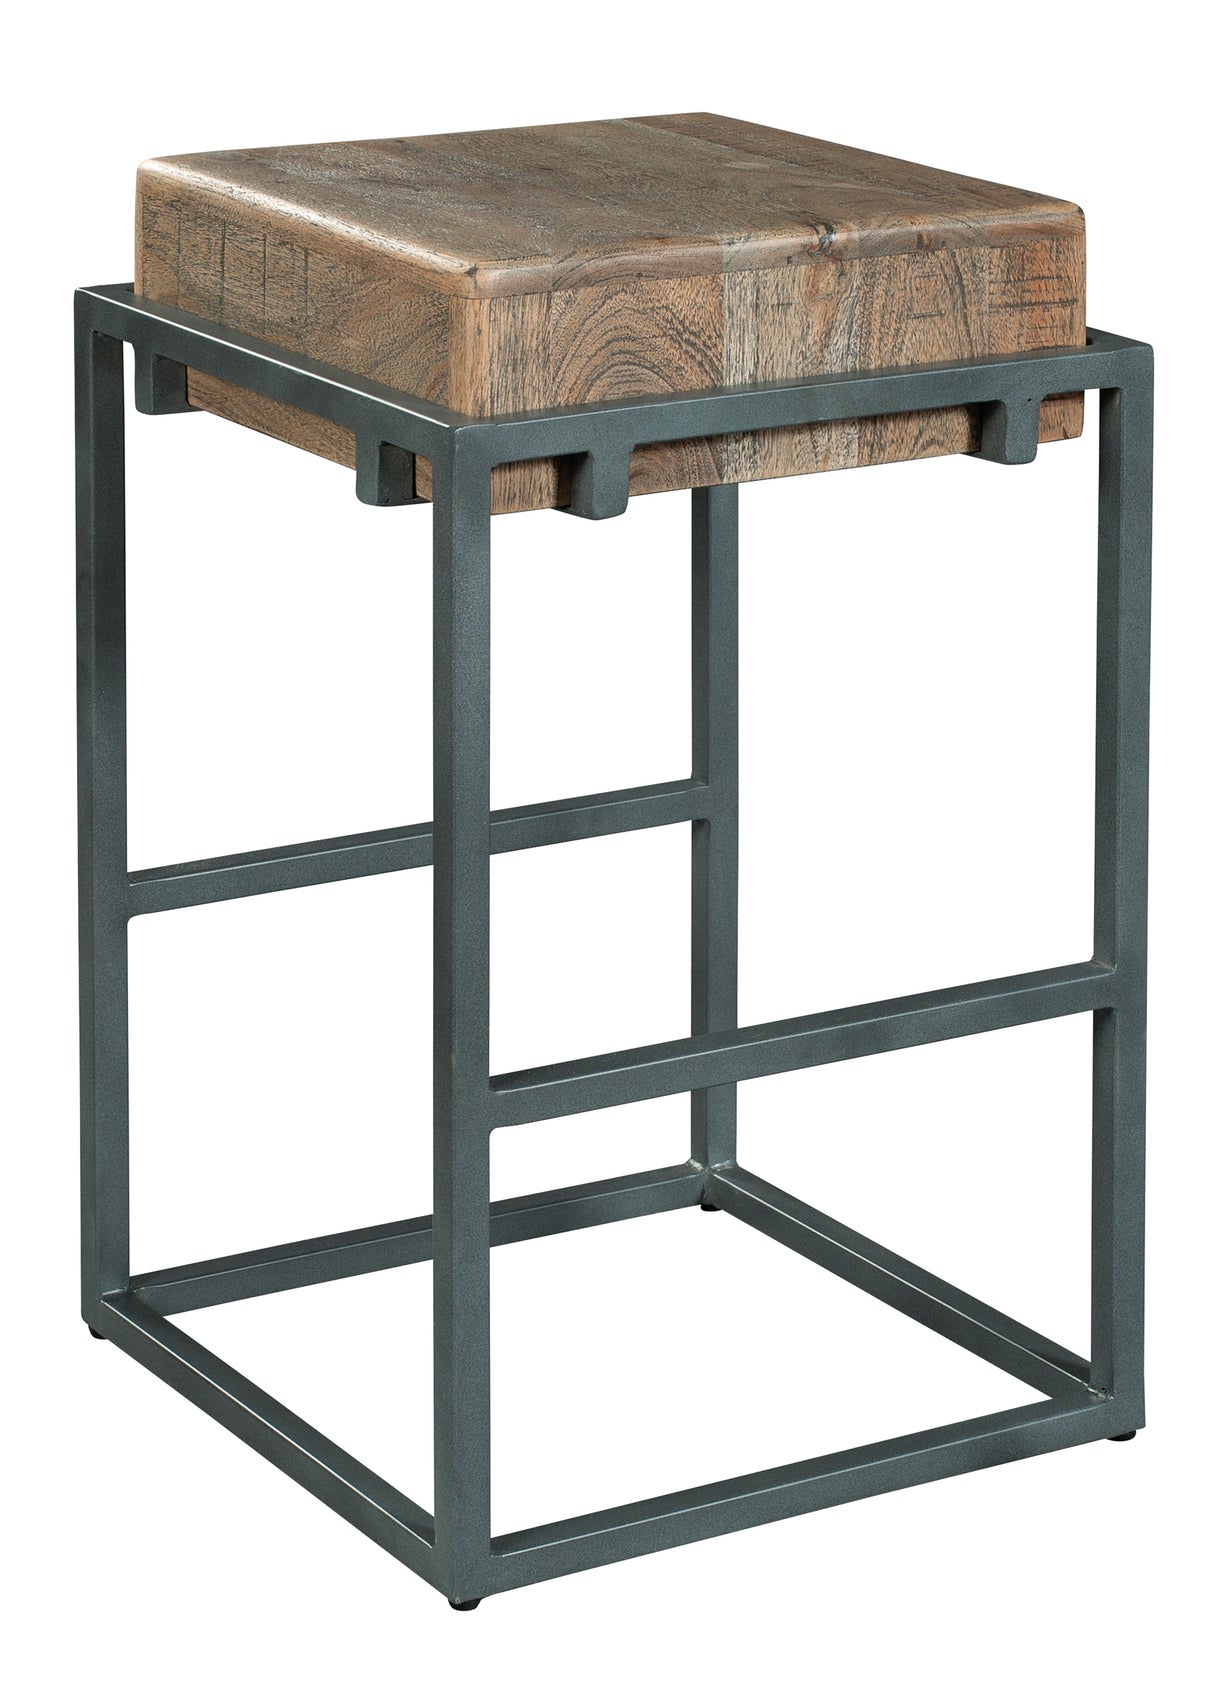 Hekman 28395 Accents 15.75in. x 15.75in. x 26.5in. Counter Stool